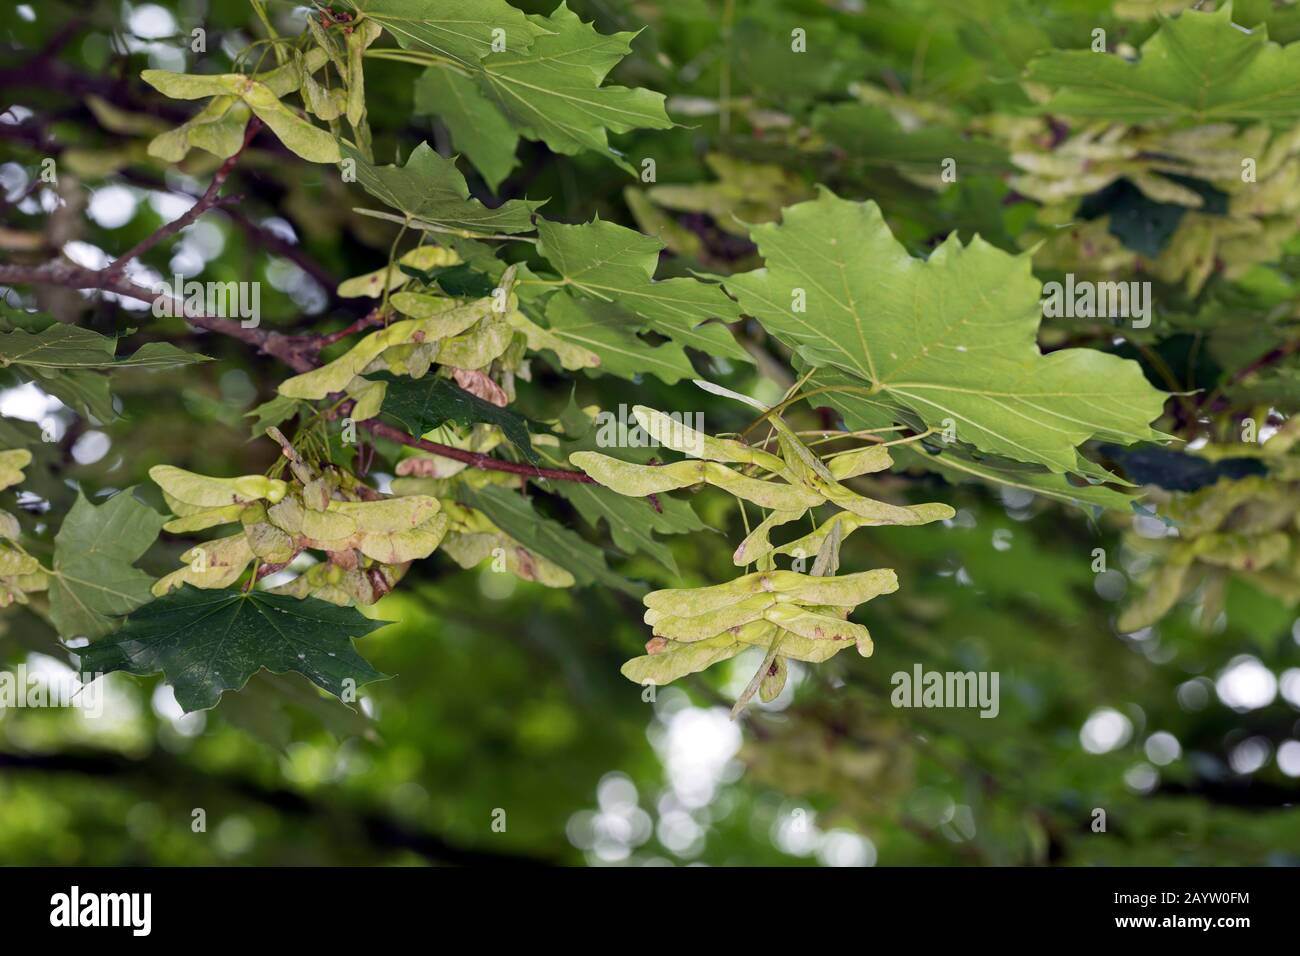 Norway maple (Acer platanoides), leaves and fruits, Germany Stock Photo